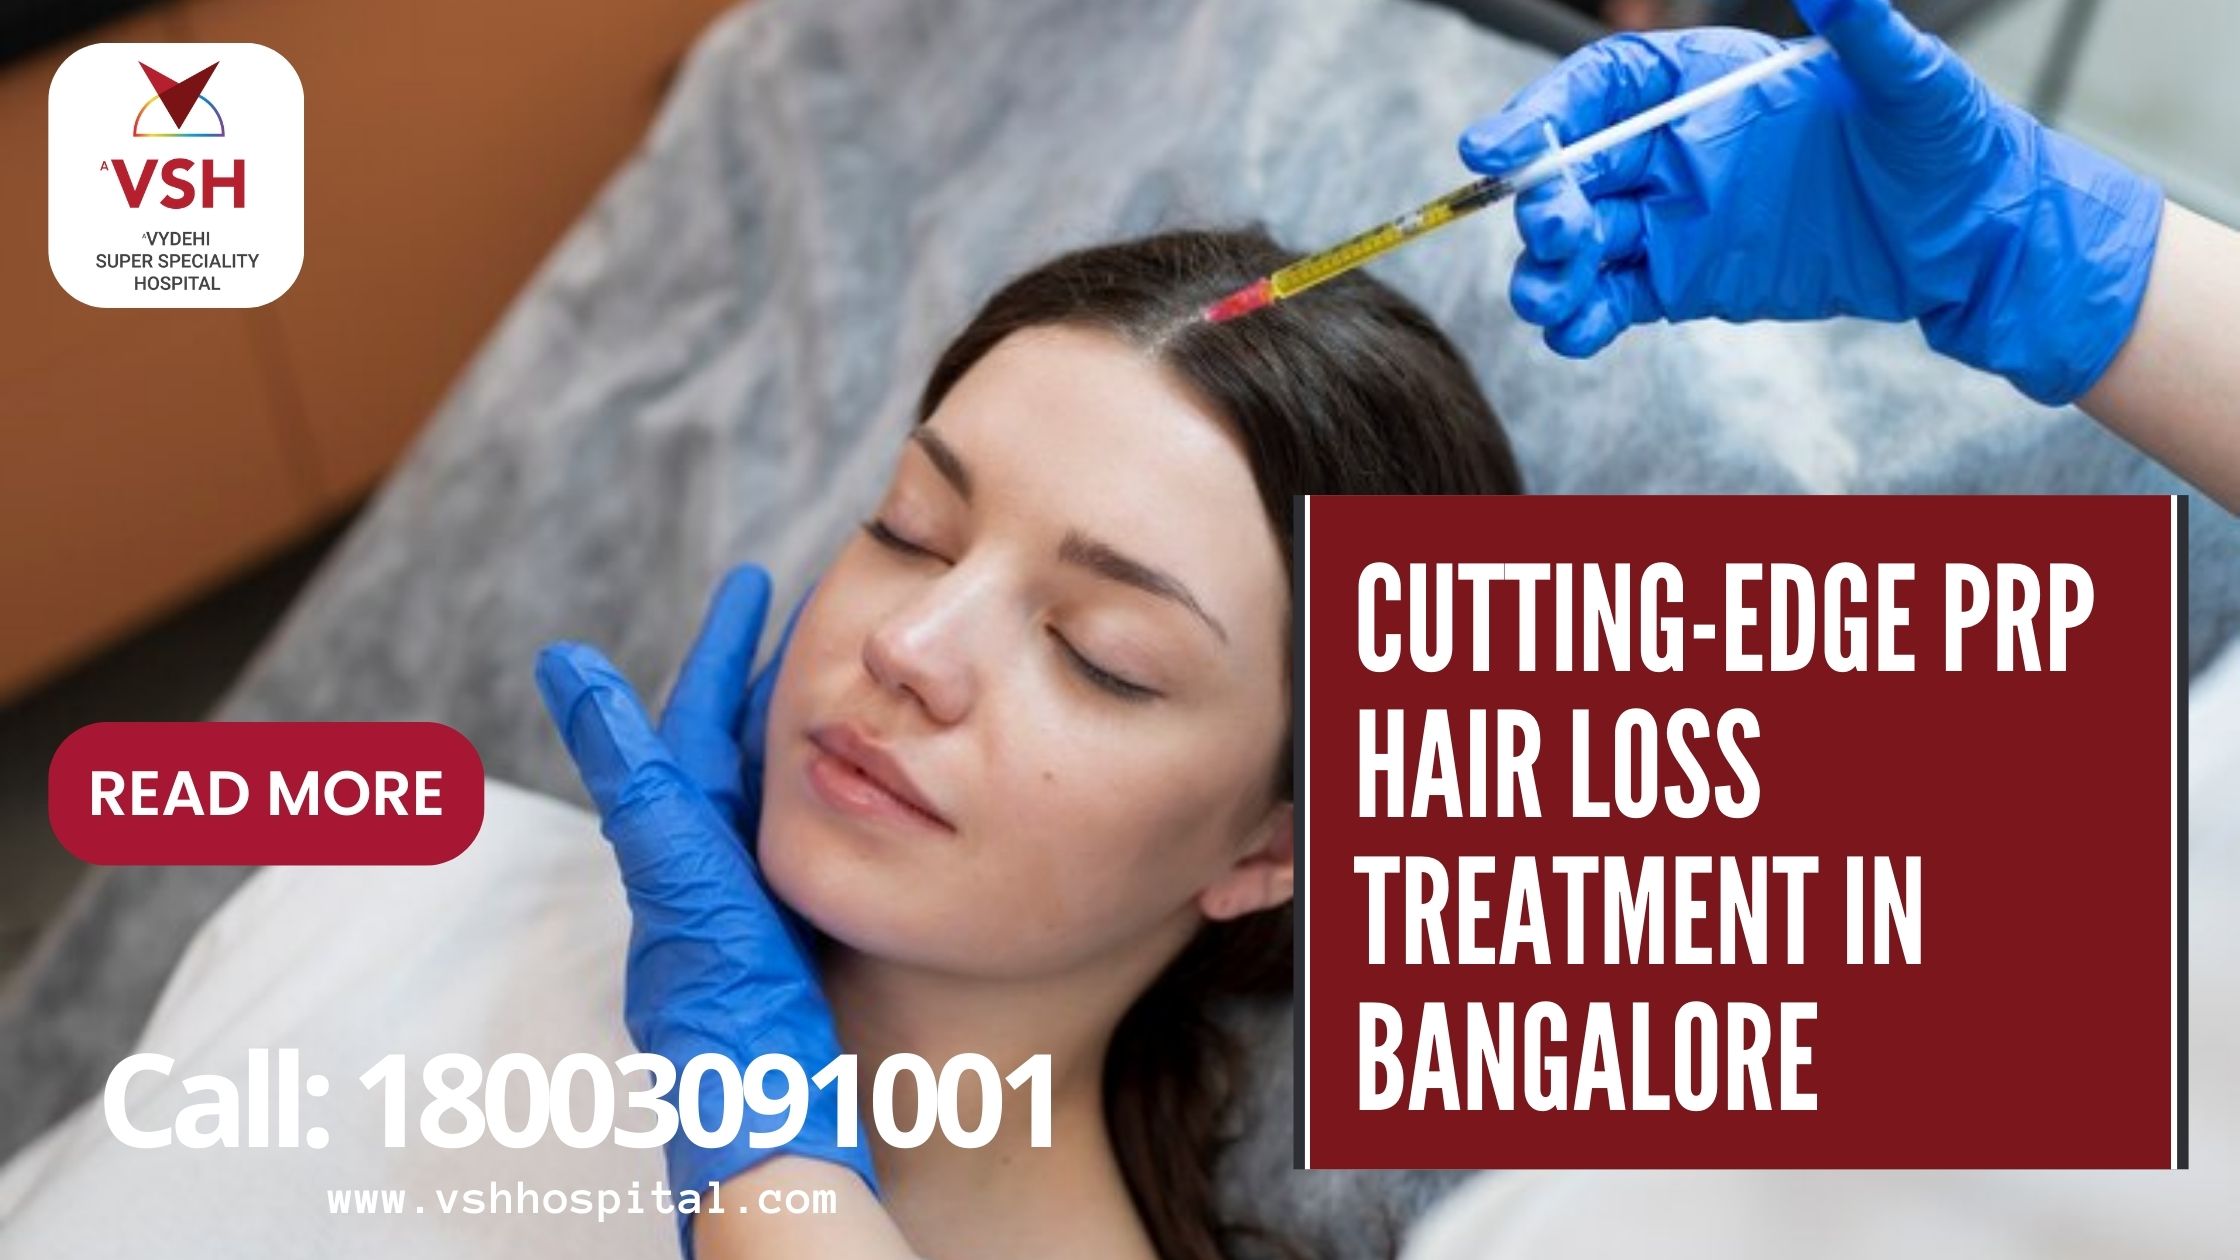 Nourish Your Hair: PRP Treatment for Hair Loss in Bangalore by VSH Hospital